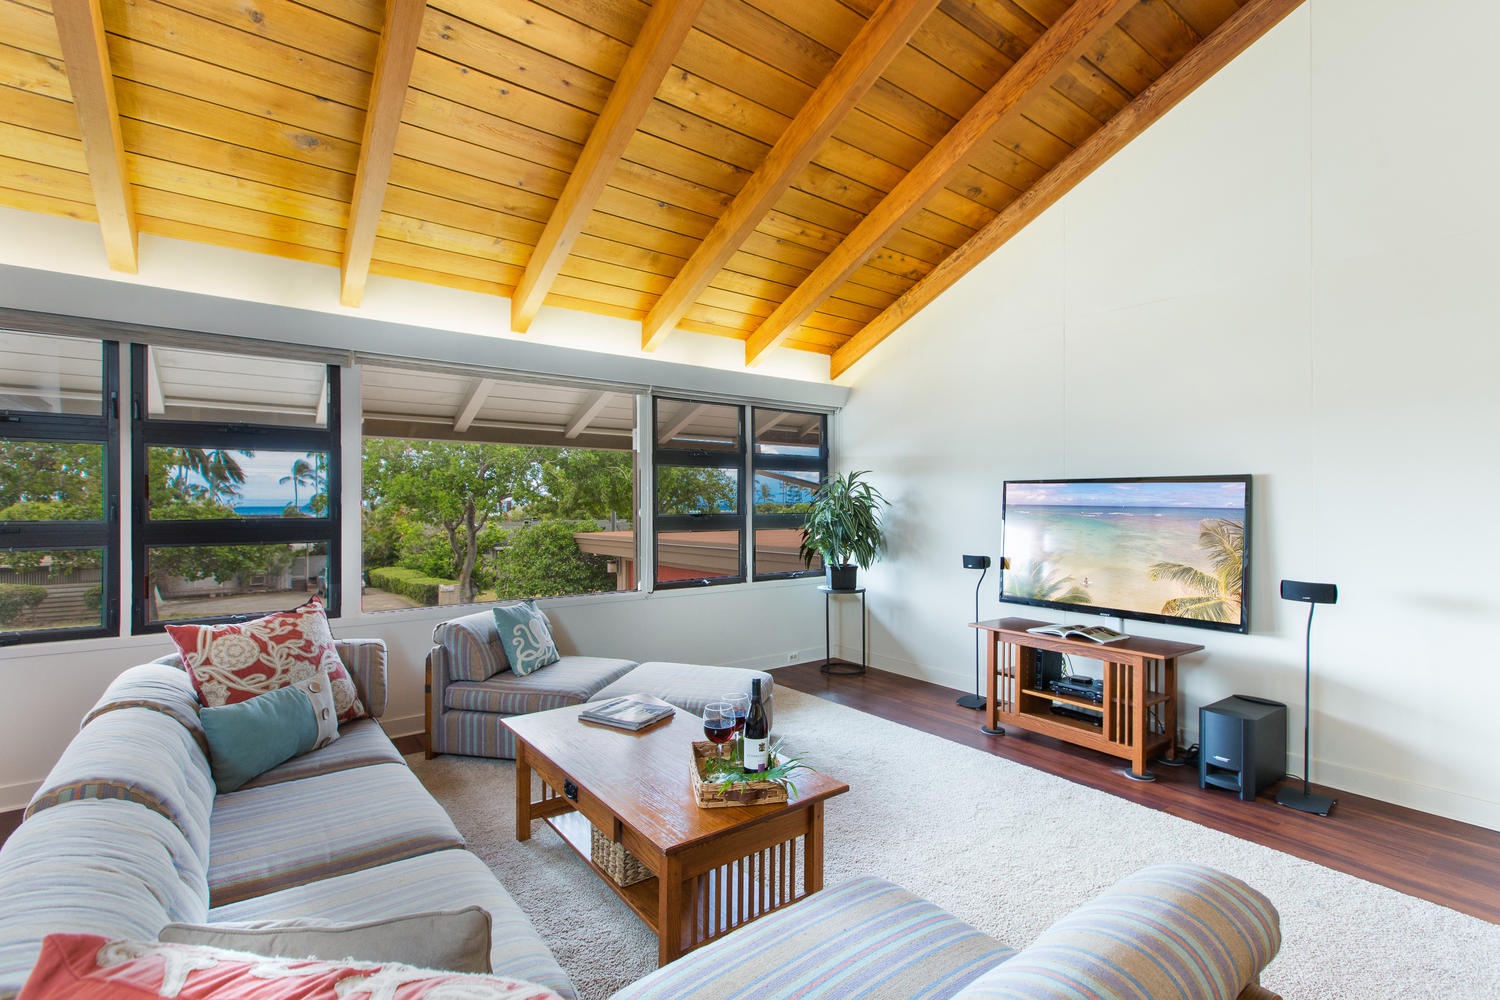 Honolulu Vacation Rentals, Hale Poola - Large open-concept living room with peek-a-boo views of the ocean